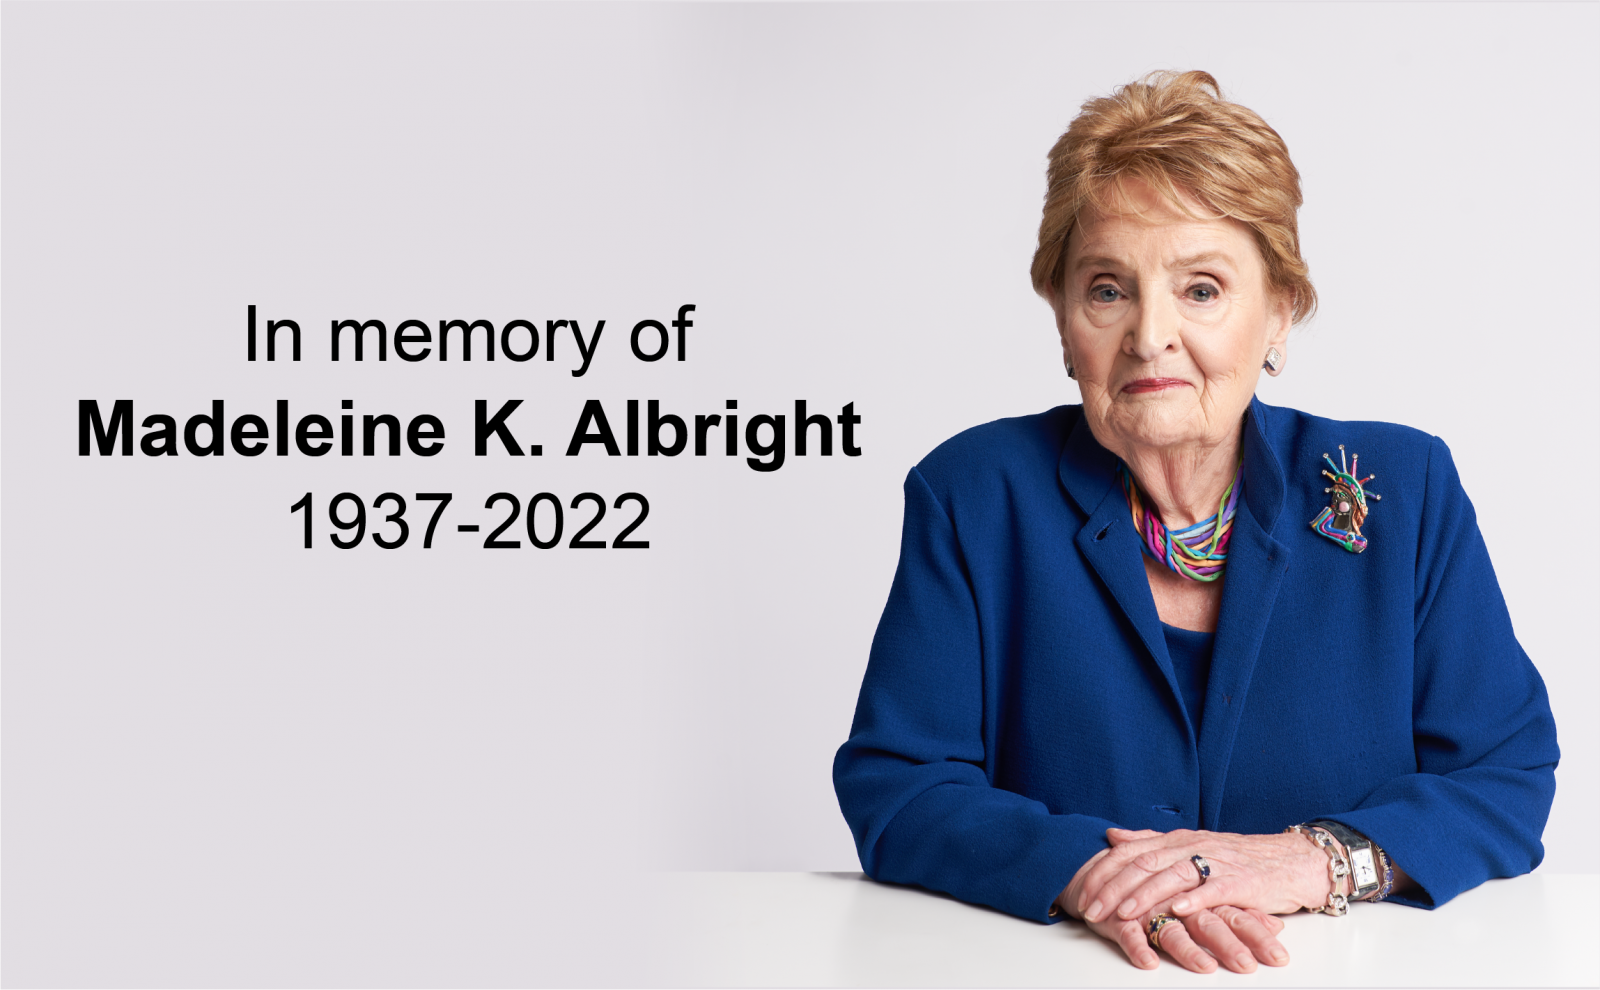 NDI Global Family Mourns Loss of Democracy Icon Madeleine K. Albright